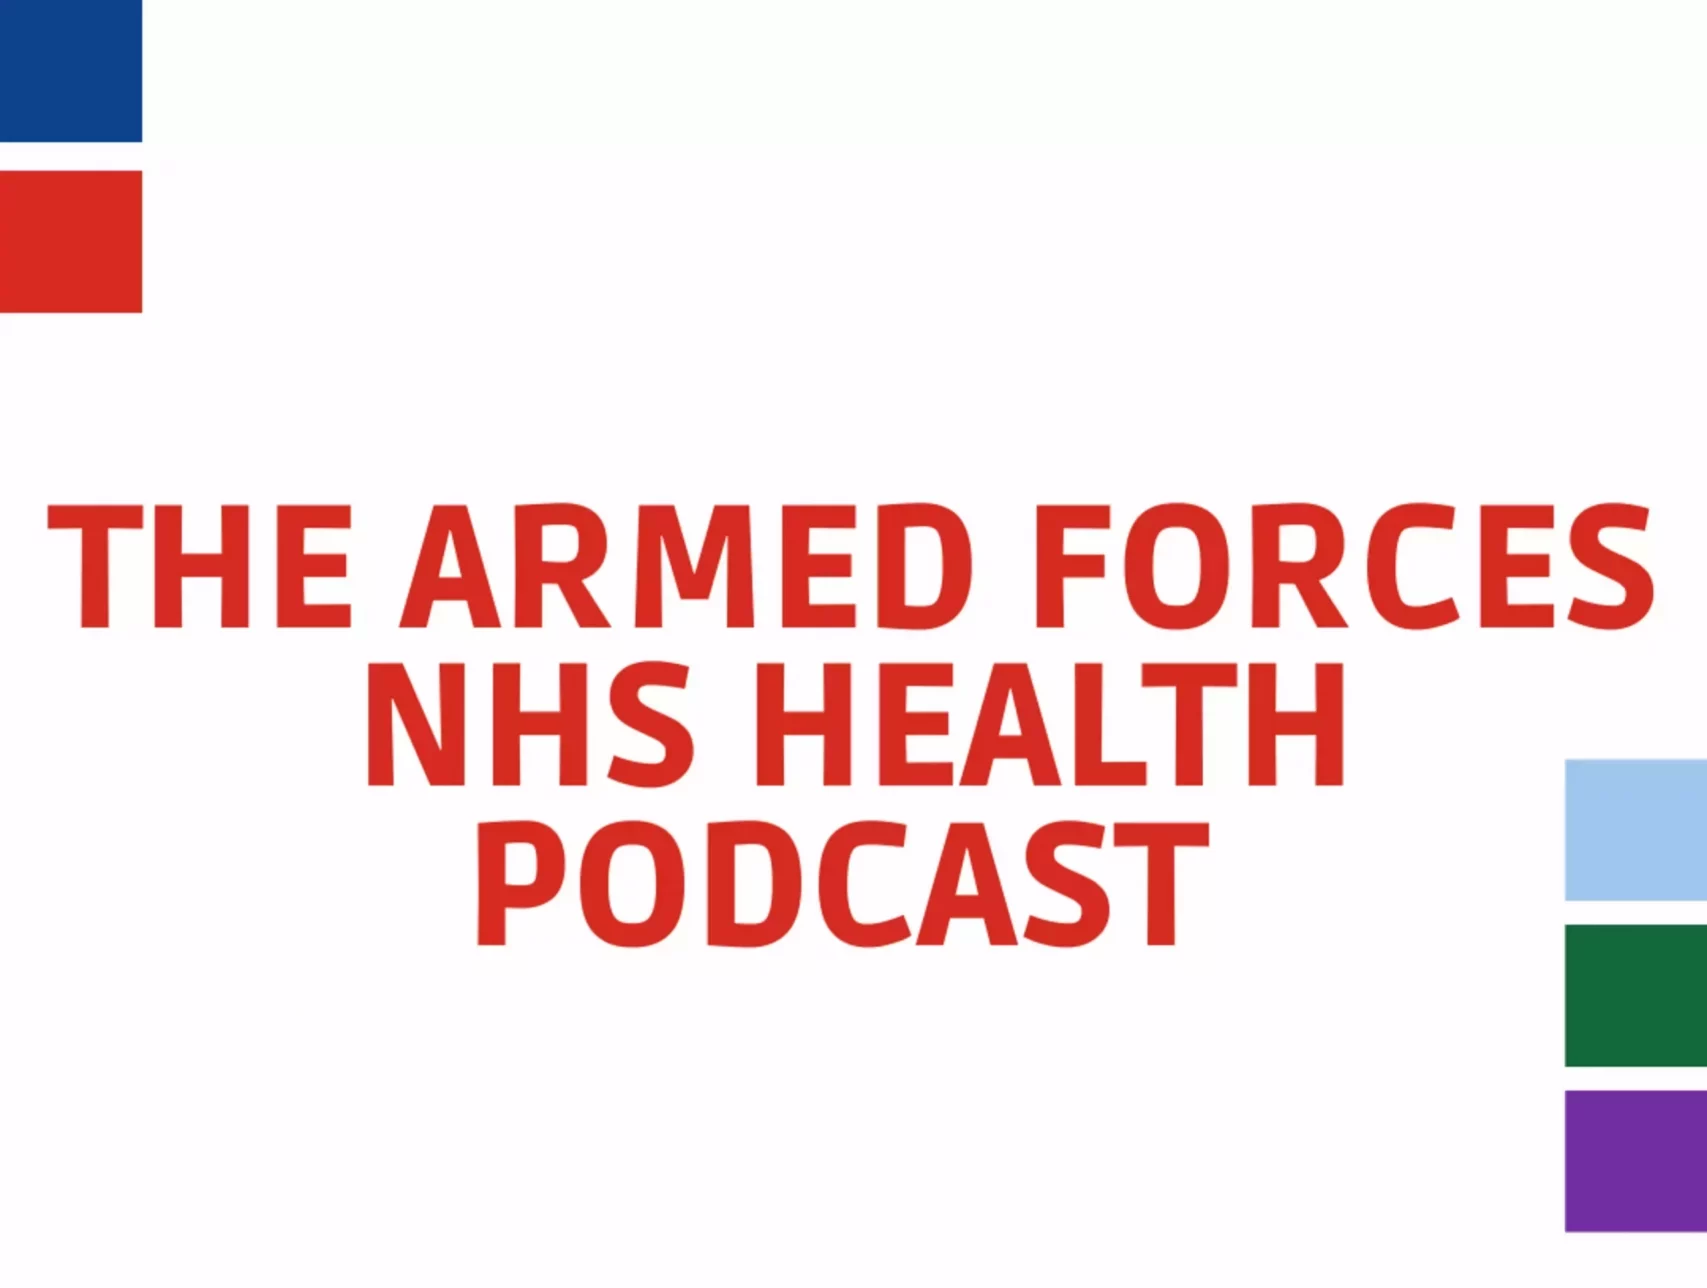 Armed Forces Patient and Public Voice Health Podcast: The Podcast